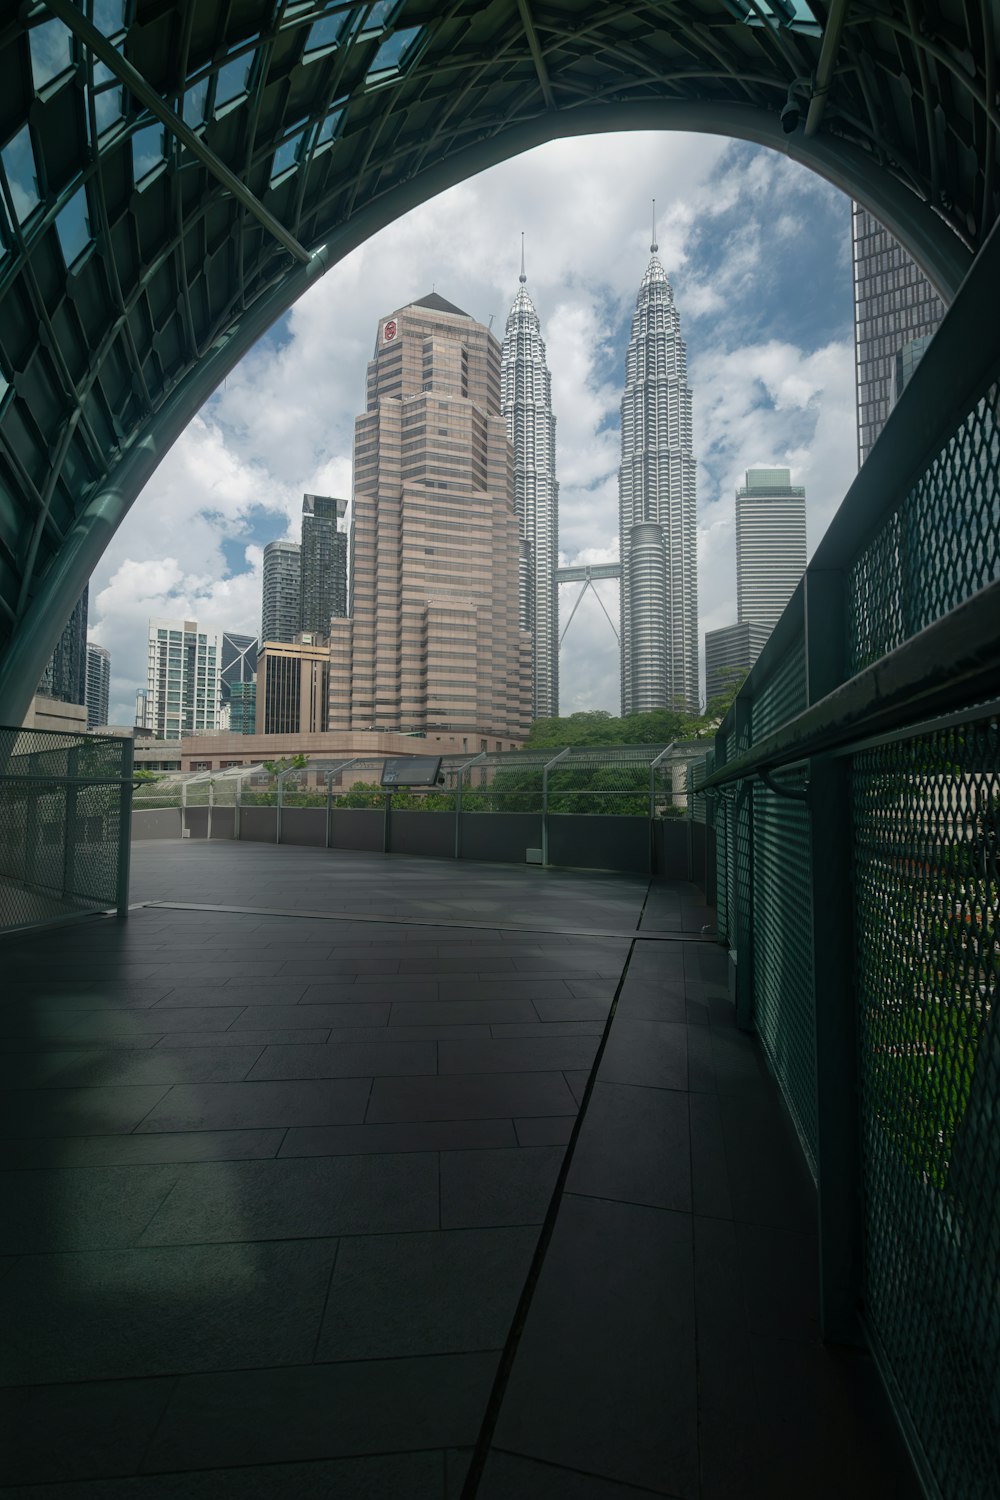 a view of a city from a walkway